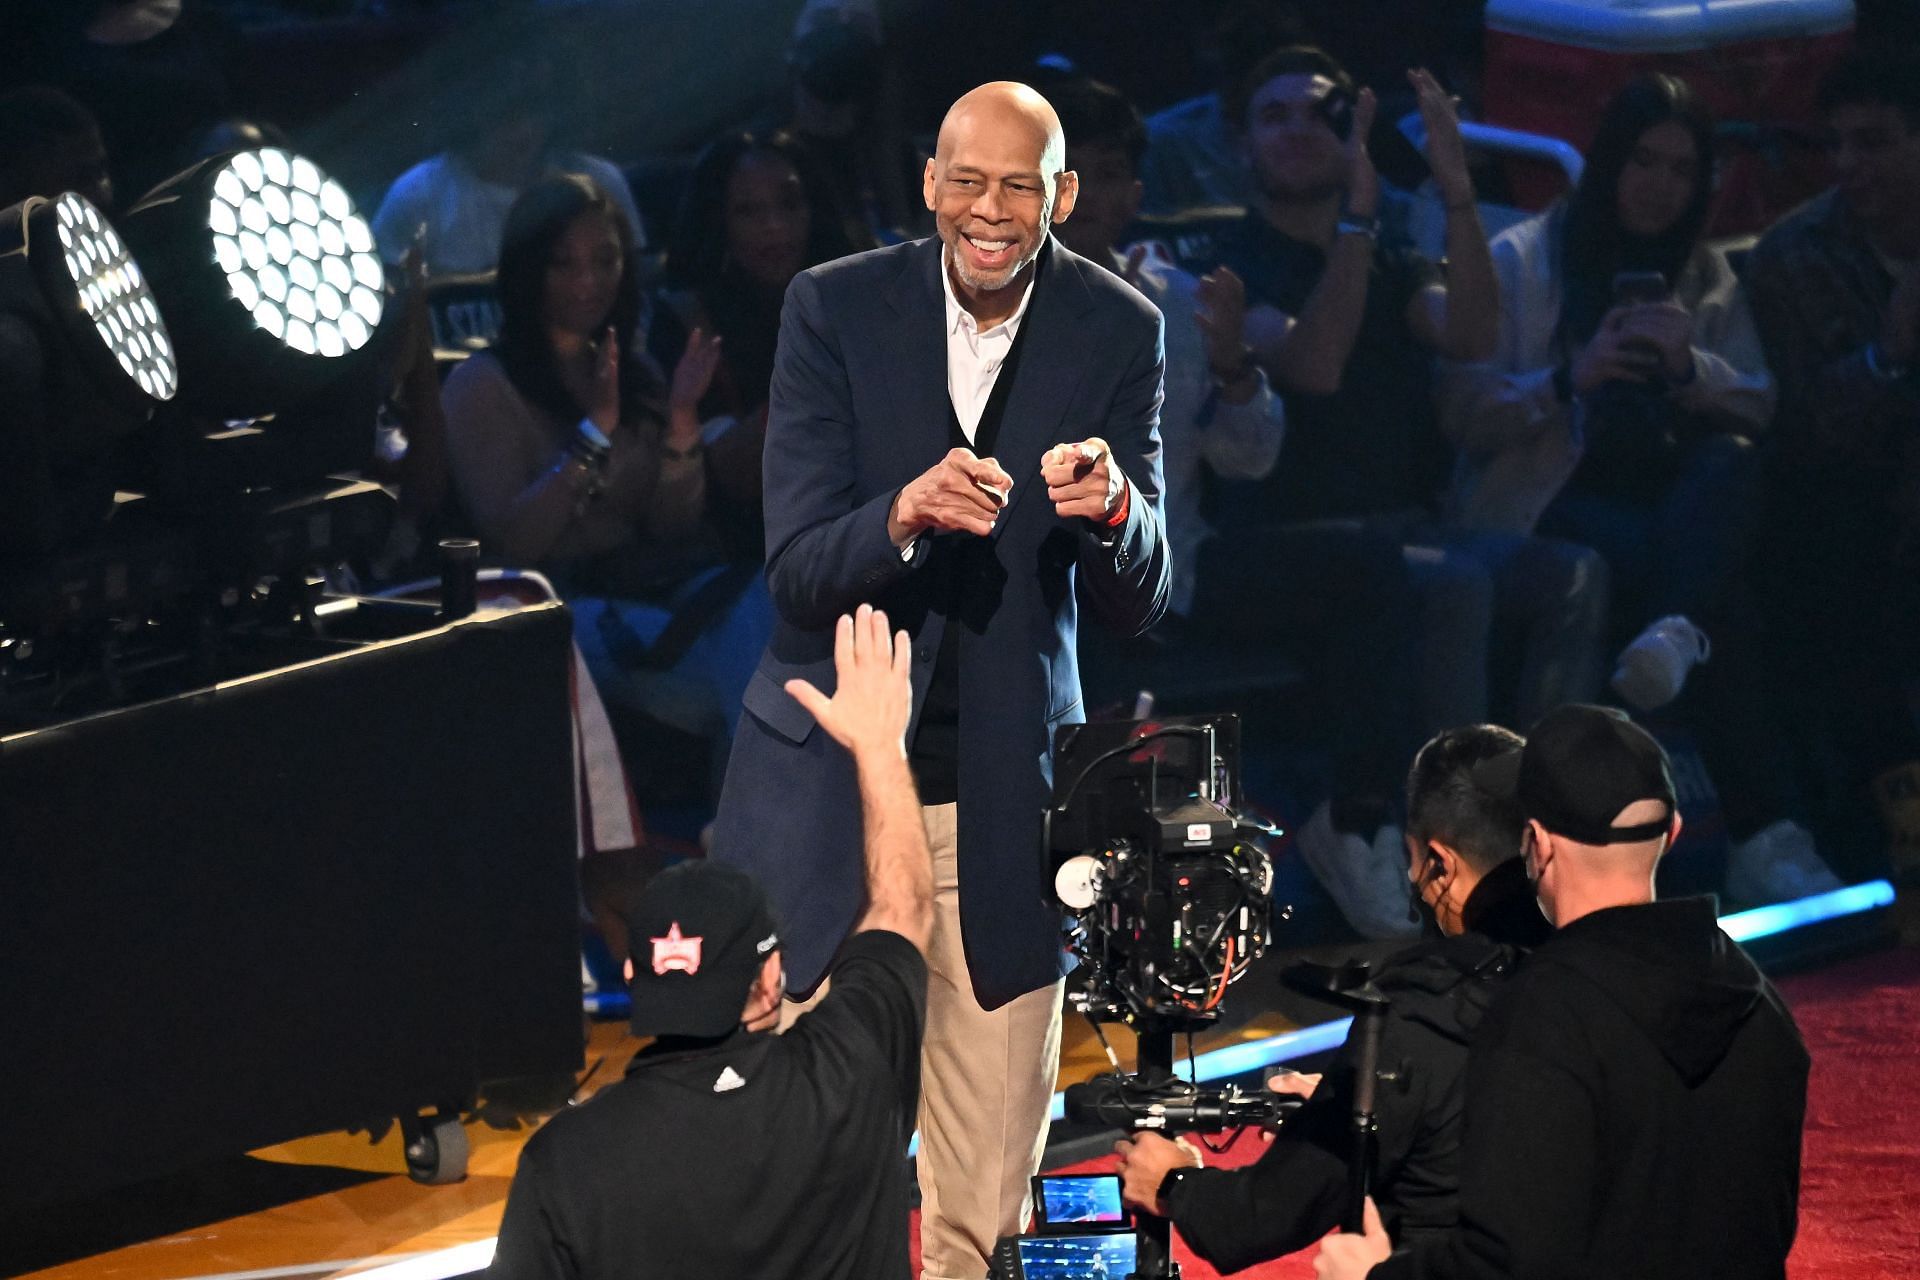 Although it was a glorified cameo, Kareem Abdul-Jabbar had one of the best crossover appearances.